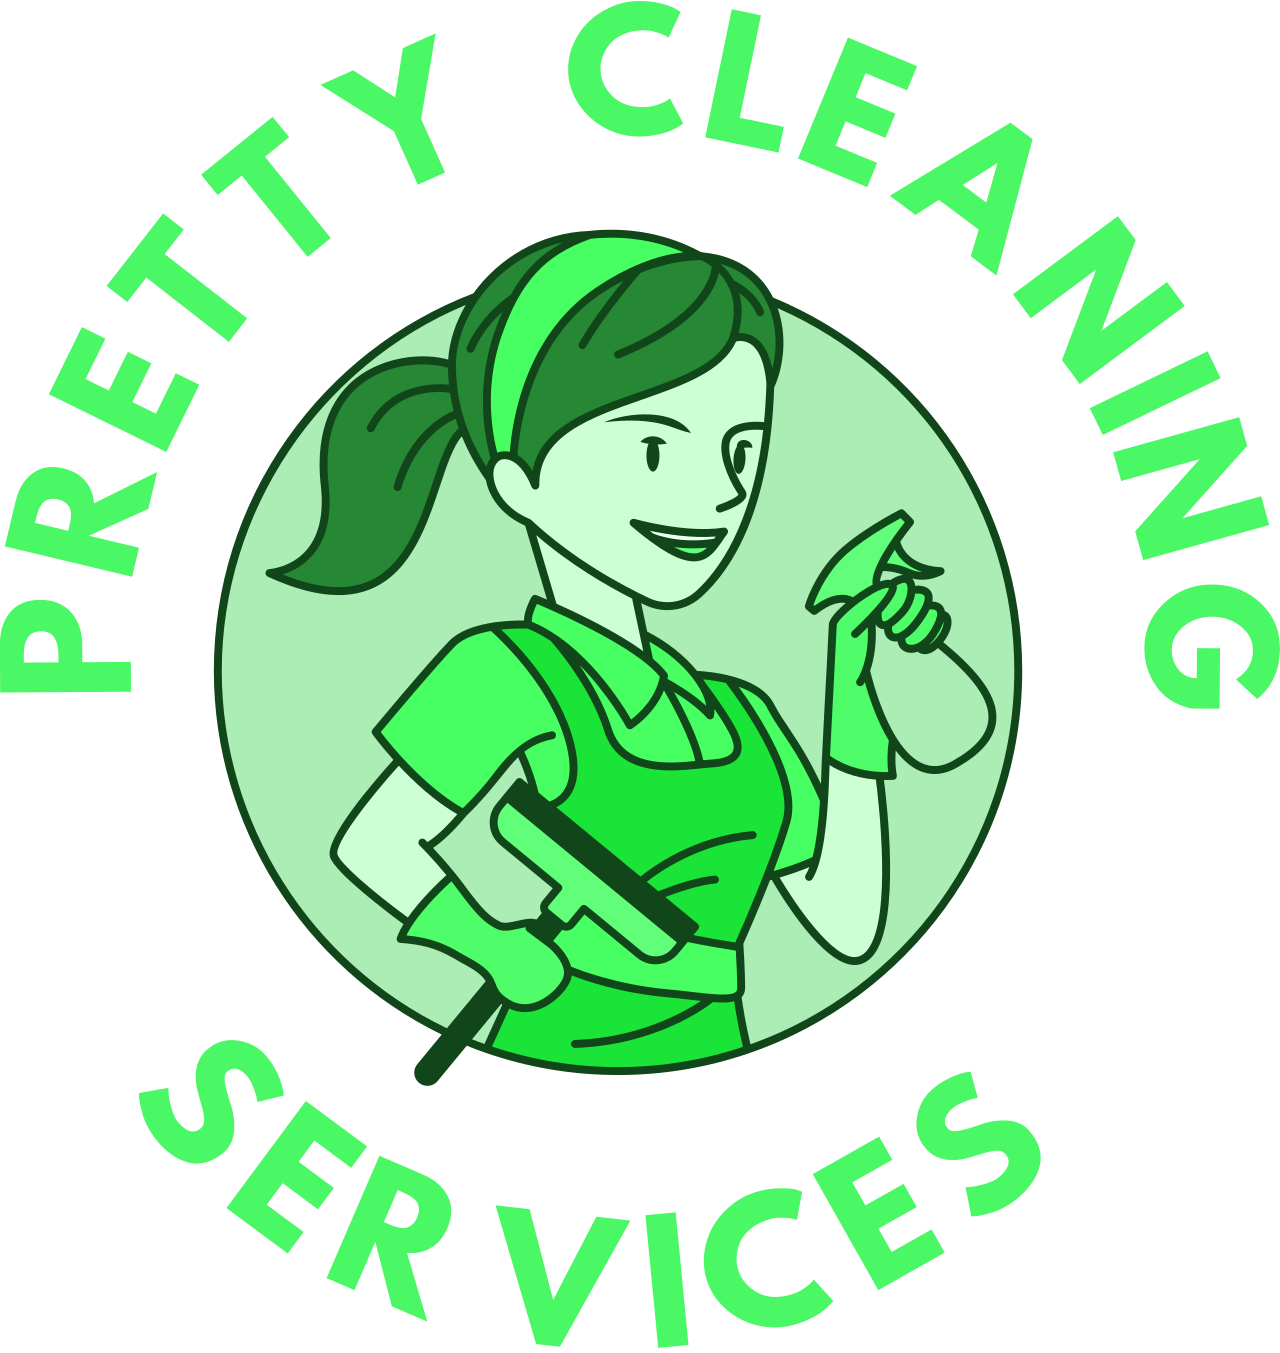 PRETTY CLEANING SERVICES 's web page